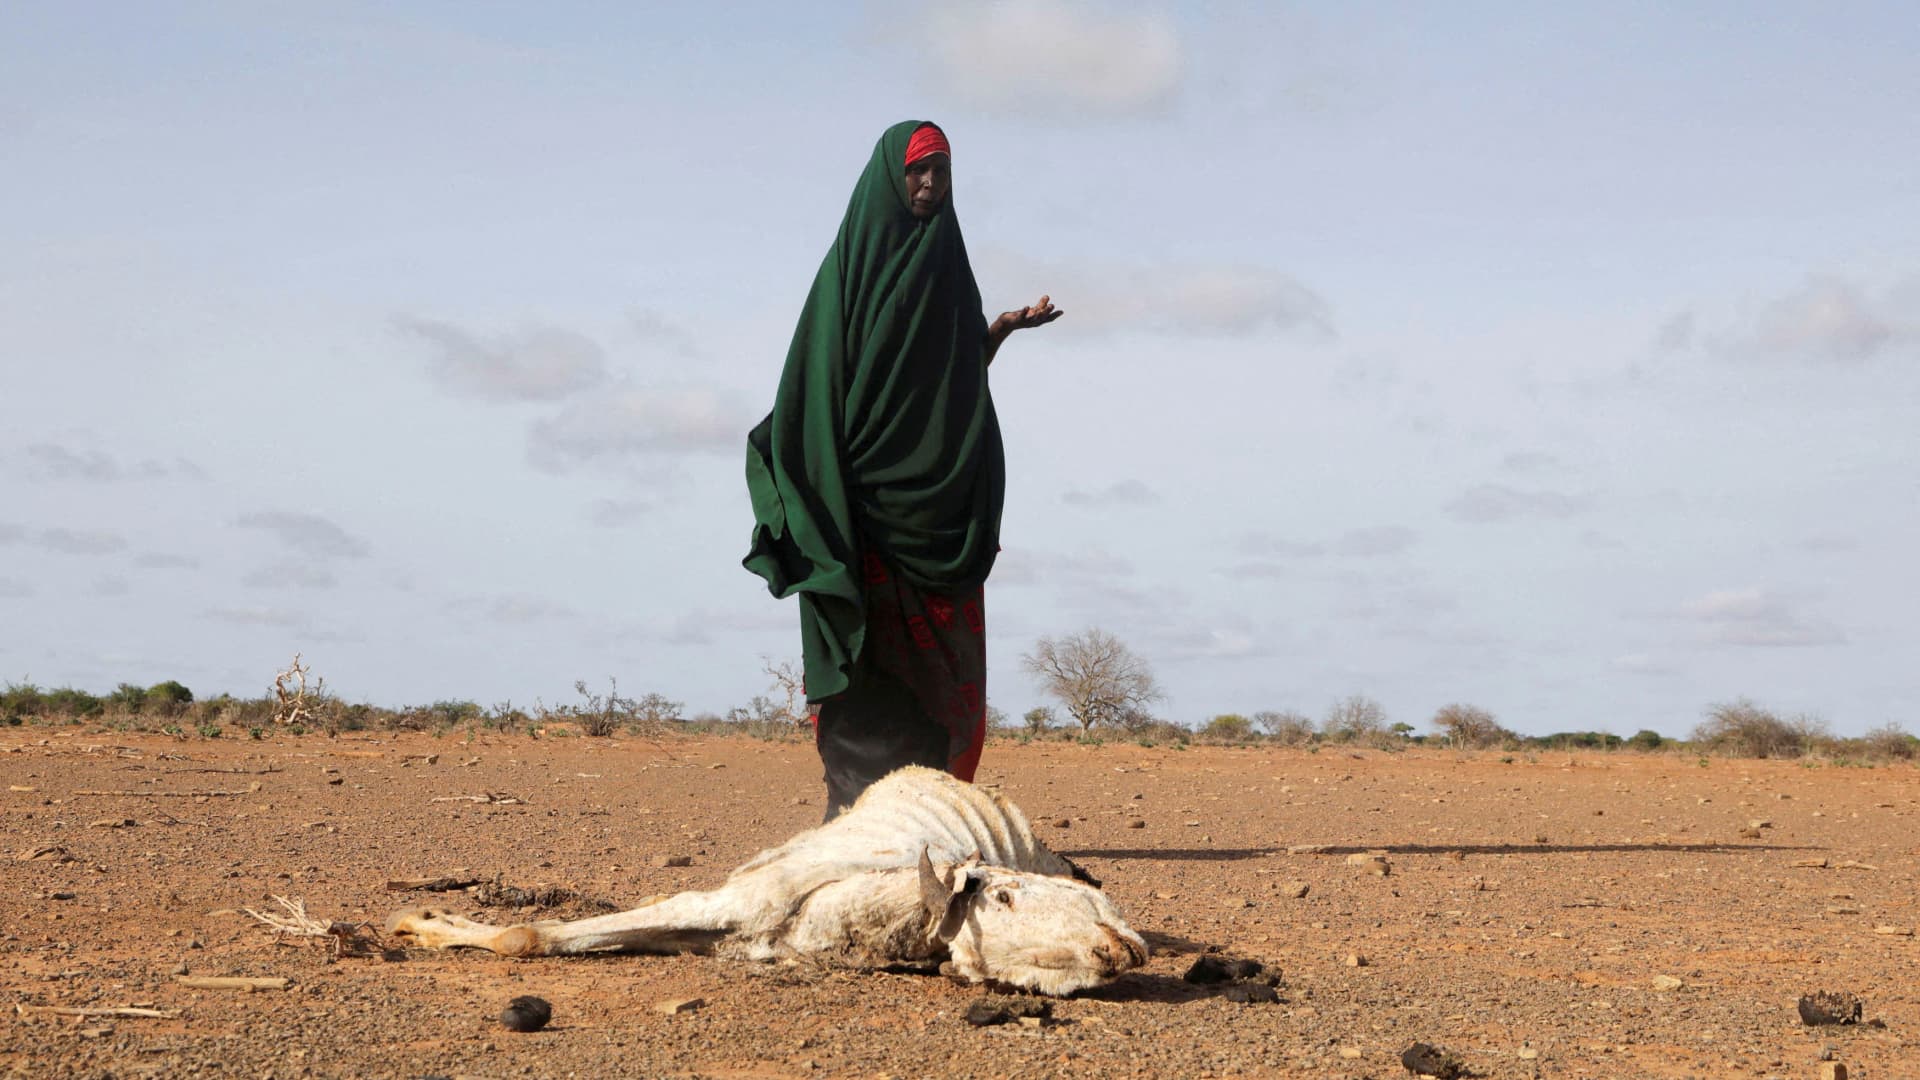 Internally displaced Somali woman Habiba Bile stands near the carcass of her dead livestock following severe droughts near Dollow, Gedo Region, Somalia, May 26, 2022.